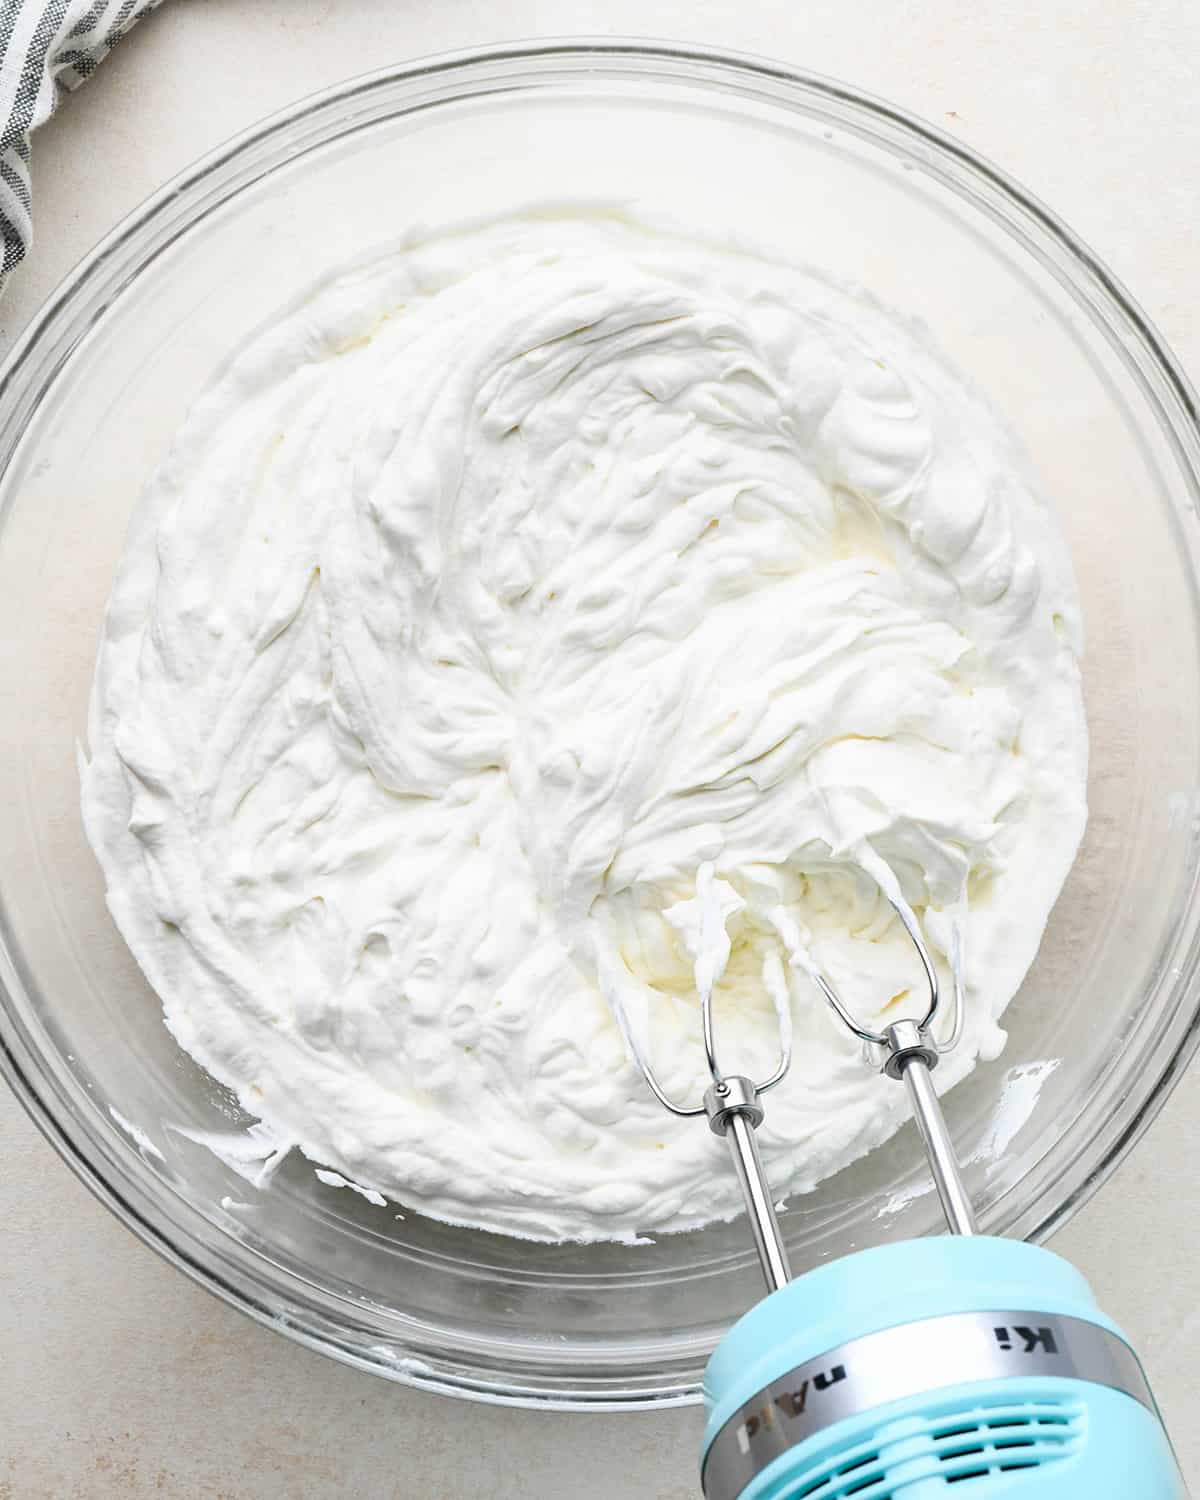 How to Make an Ice Cream Cake - whipped cream ingredients in a bowl after whipping